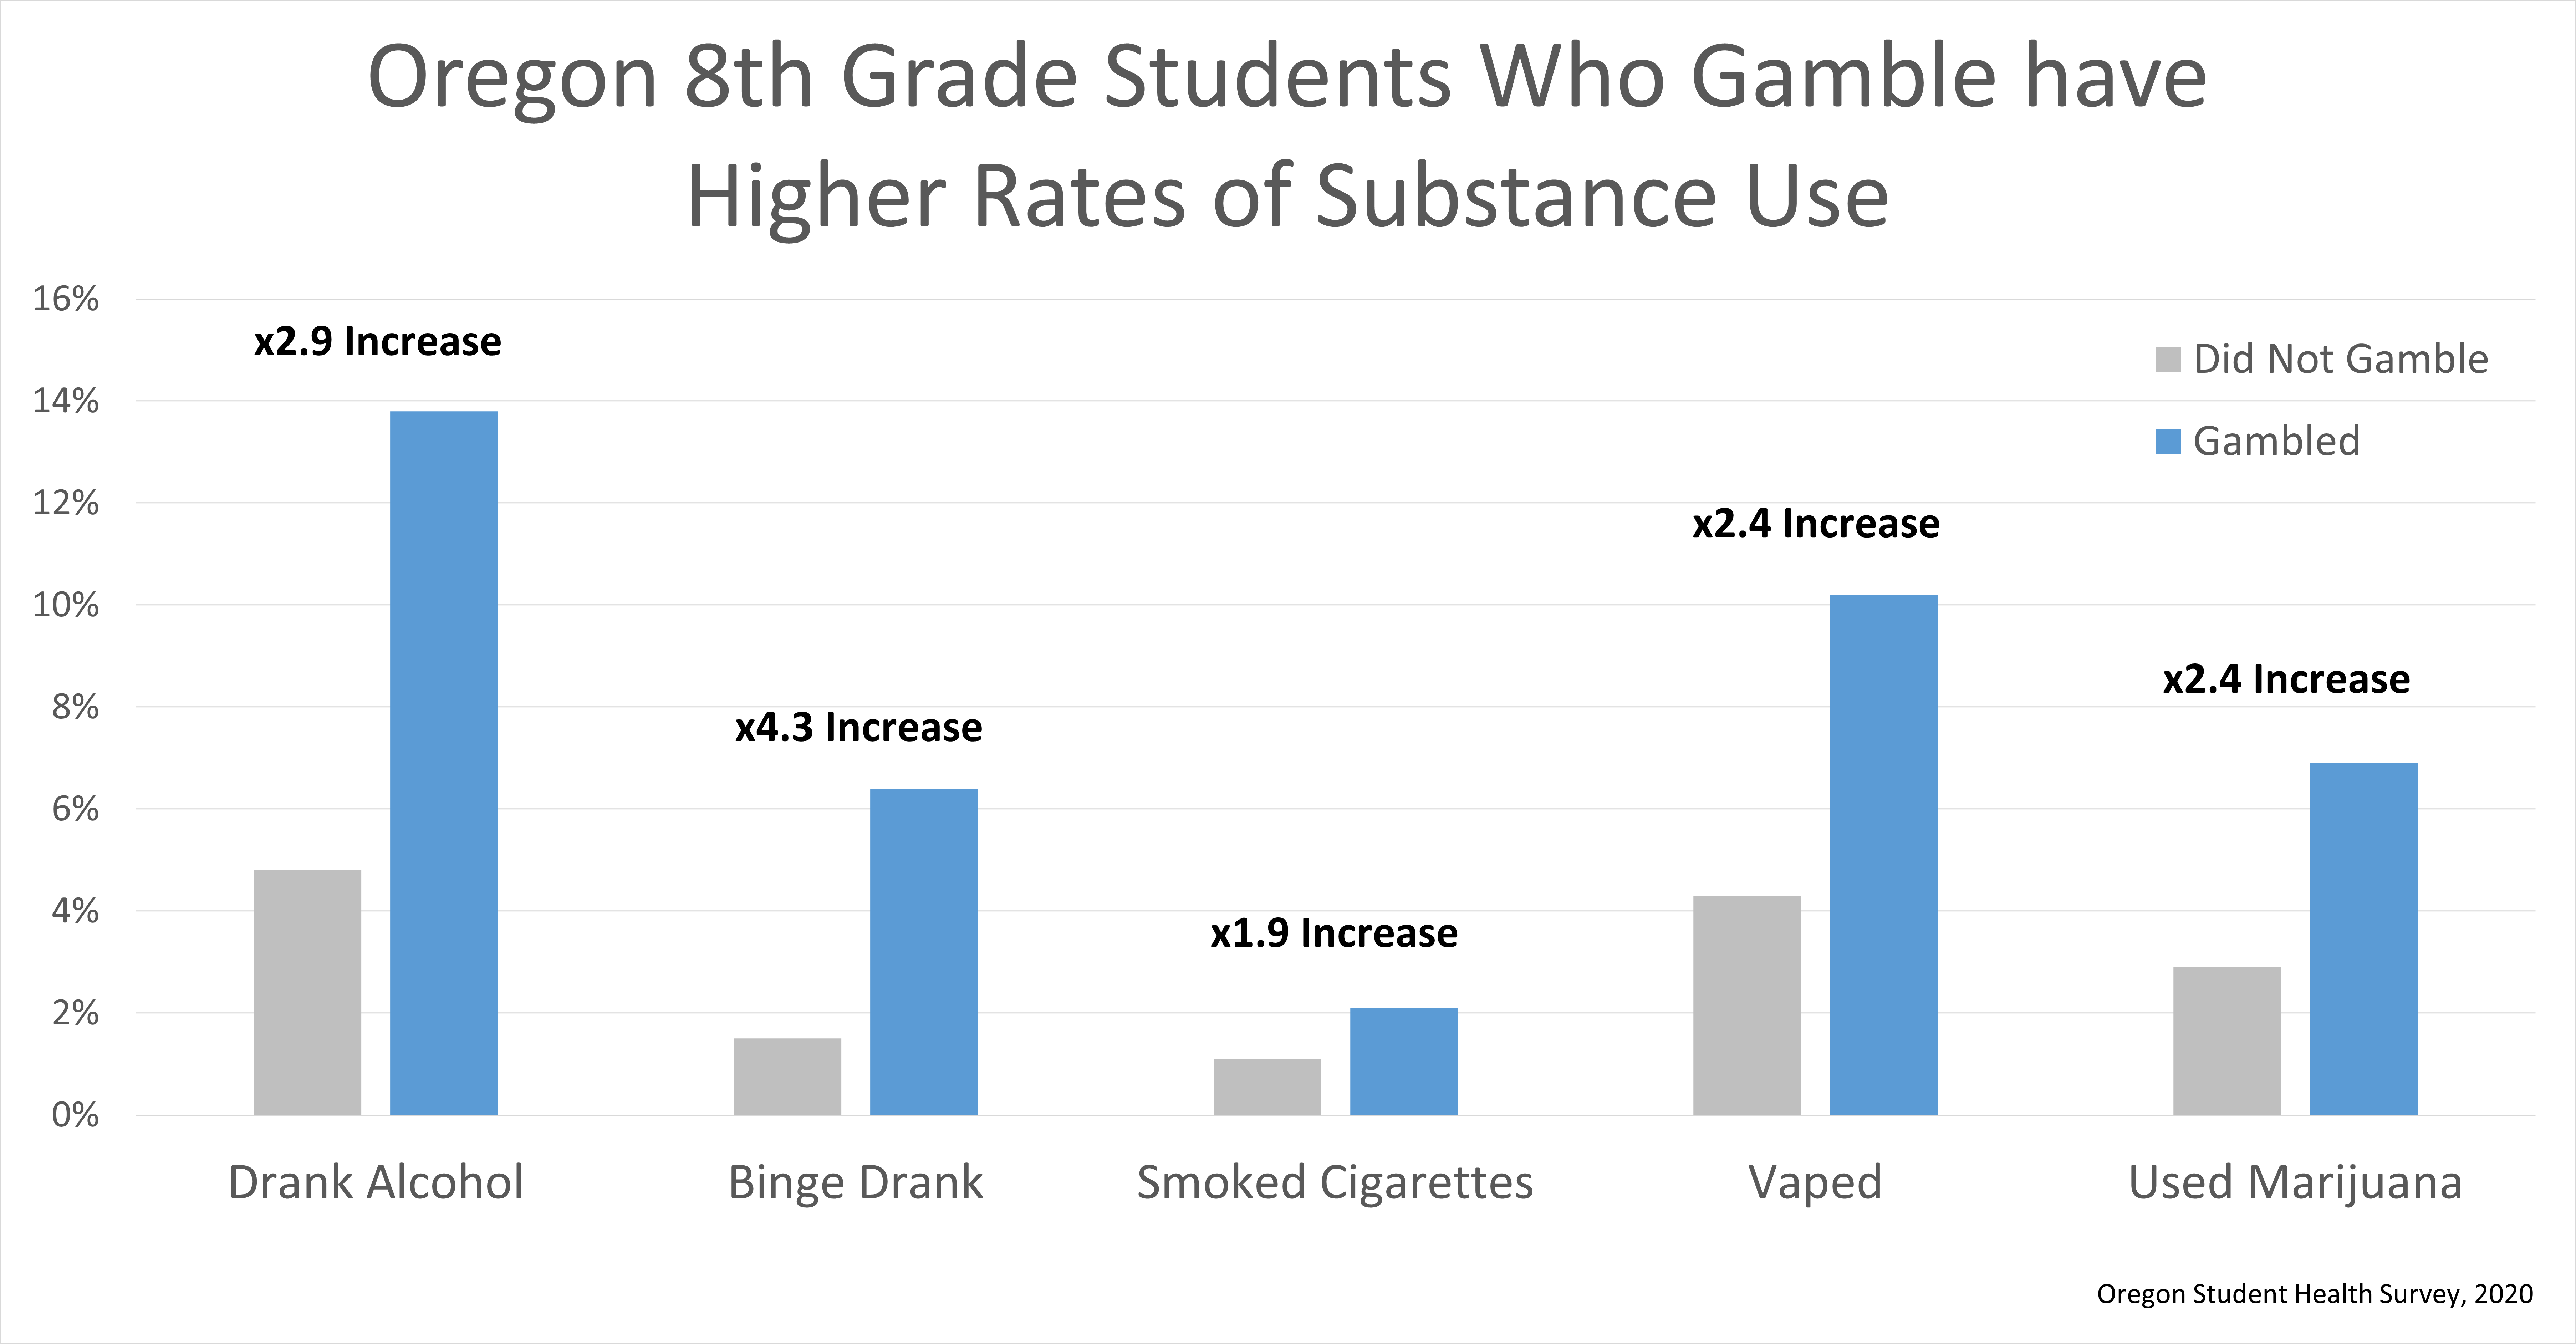 Oregon 8th grade students who gamble have higher rates of substance use